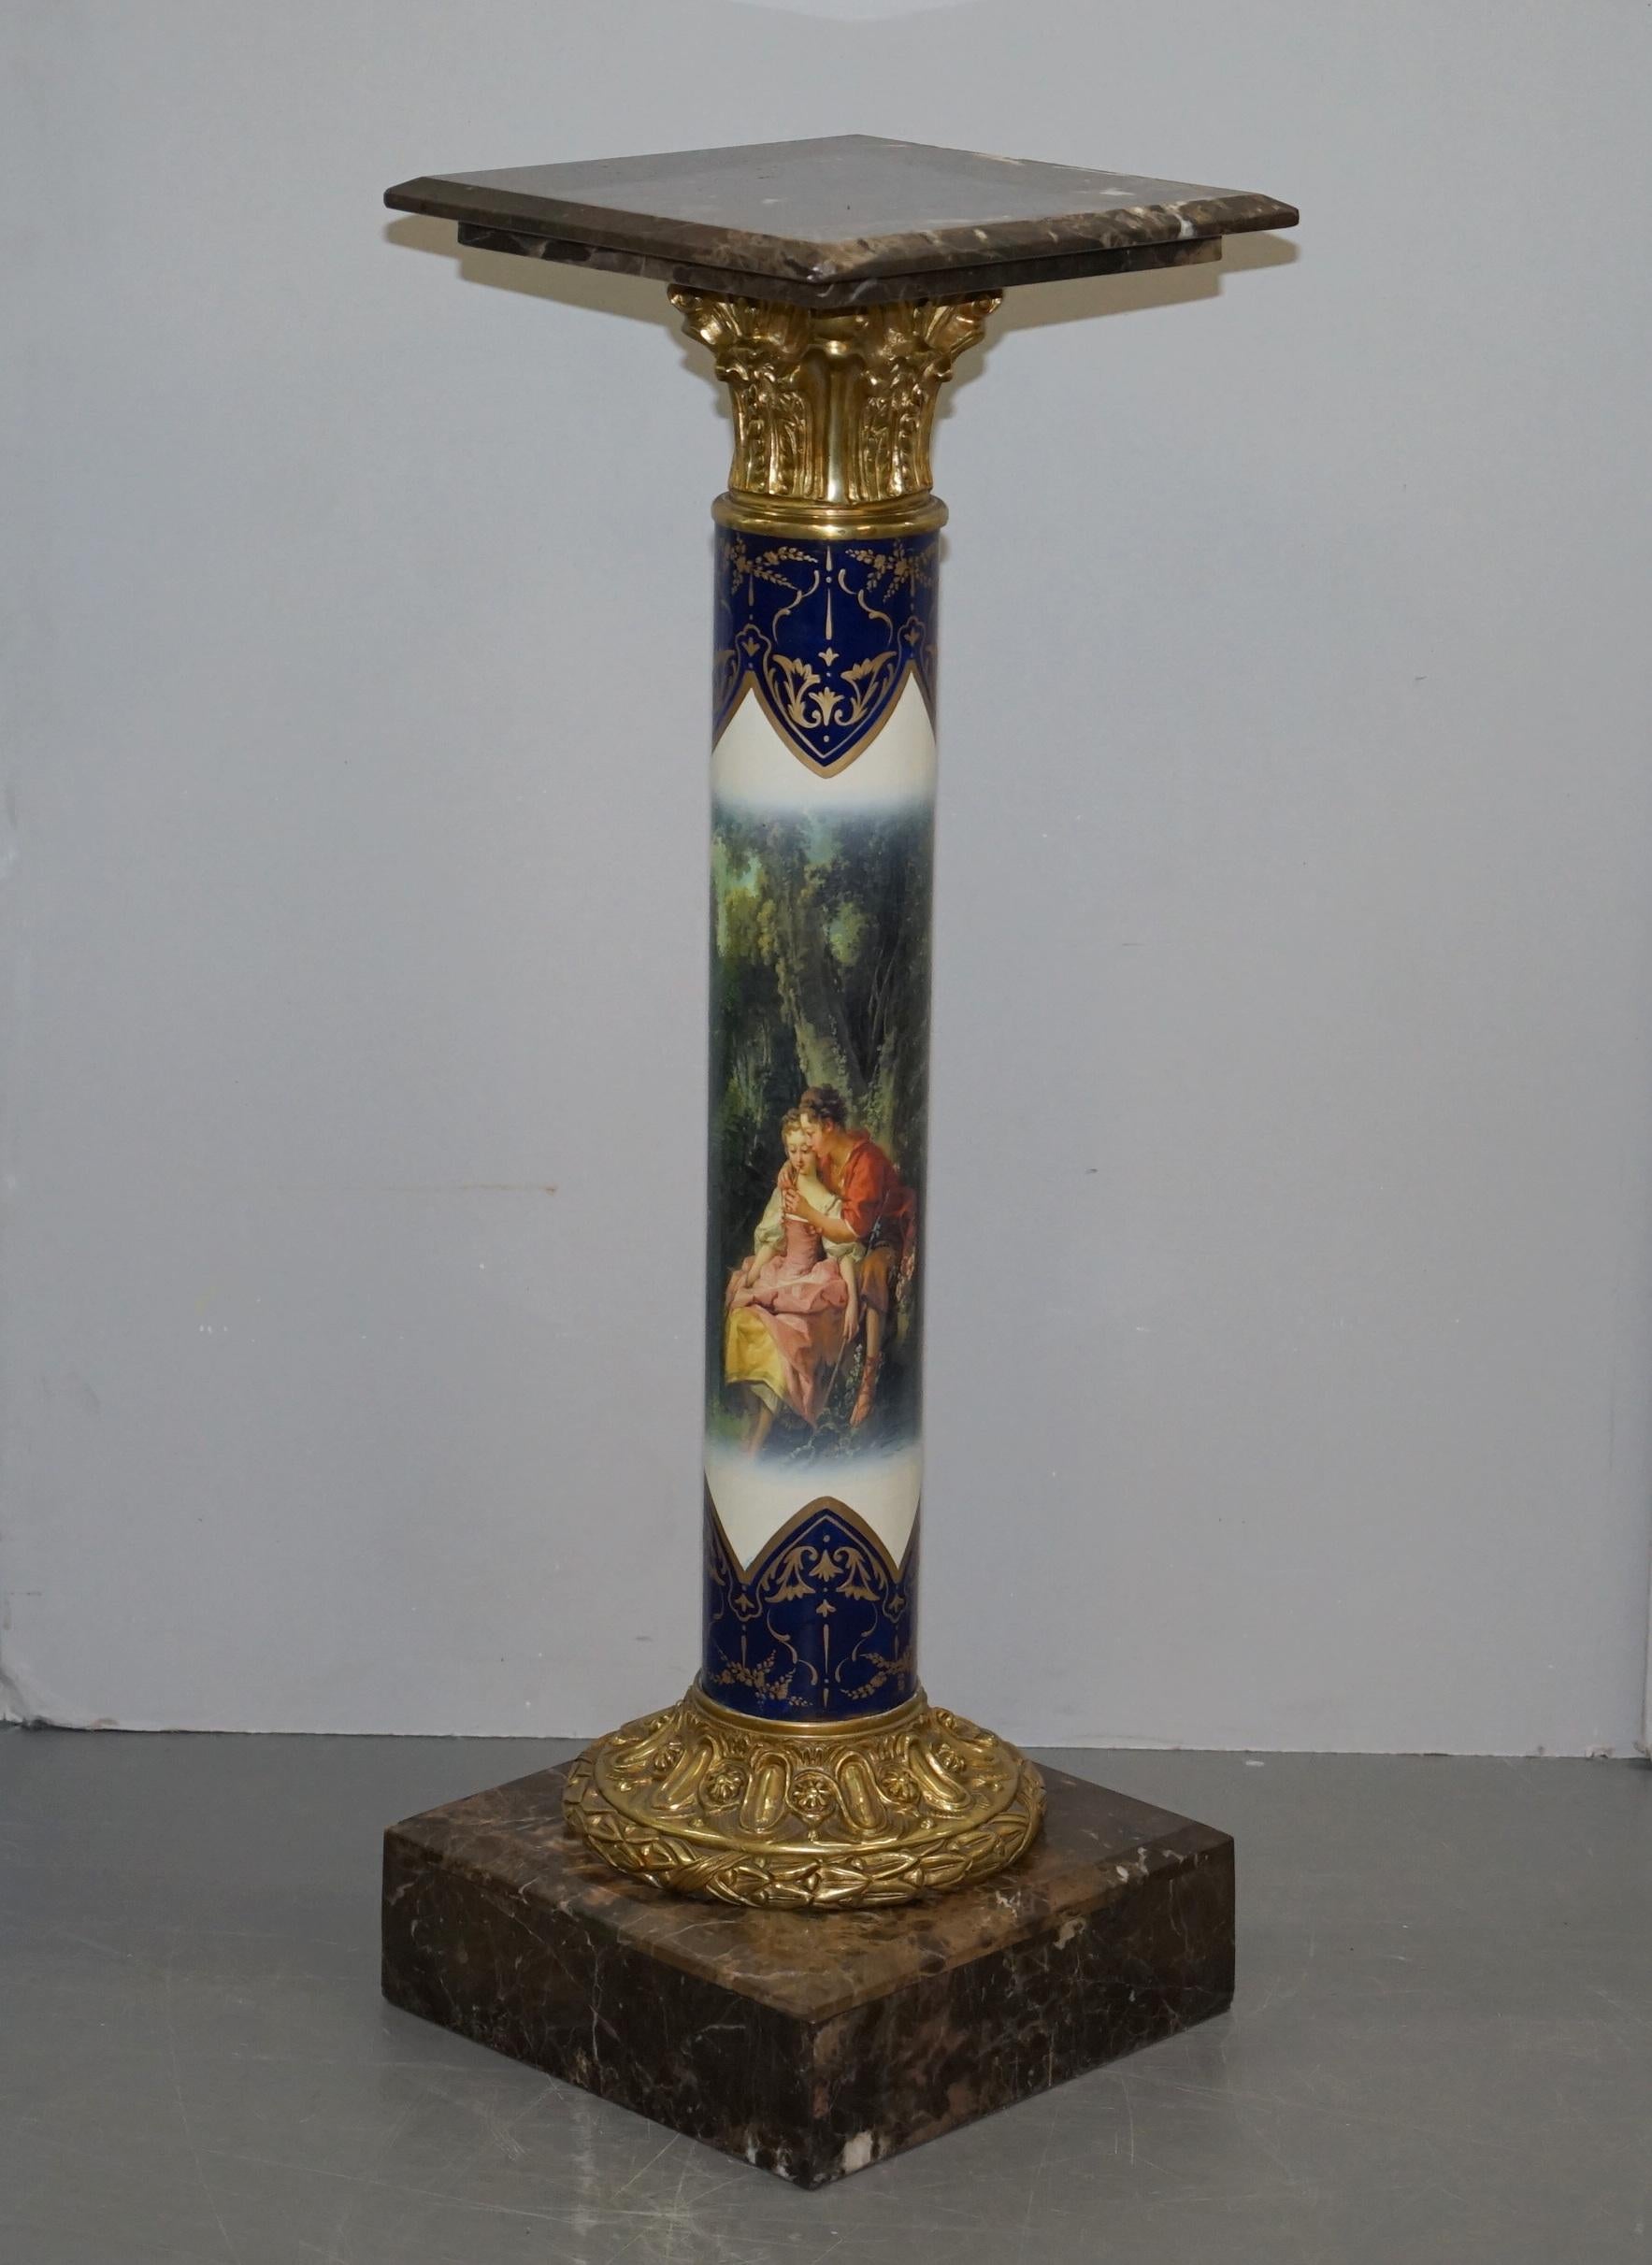 We are delighted to offer for sale this stunning pair of early 20th century circa 1920s French marble and gilt bronze pedestal pillars with hand painted porcelain bodies depicting lovers in a rural setting

These are quite simply the most